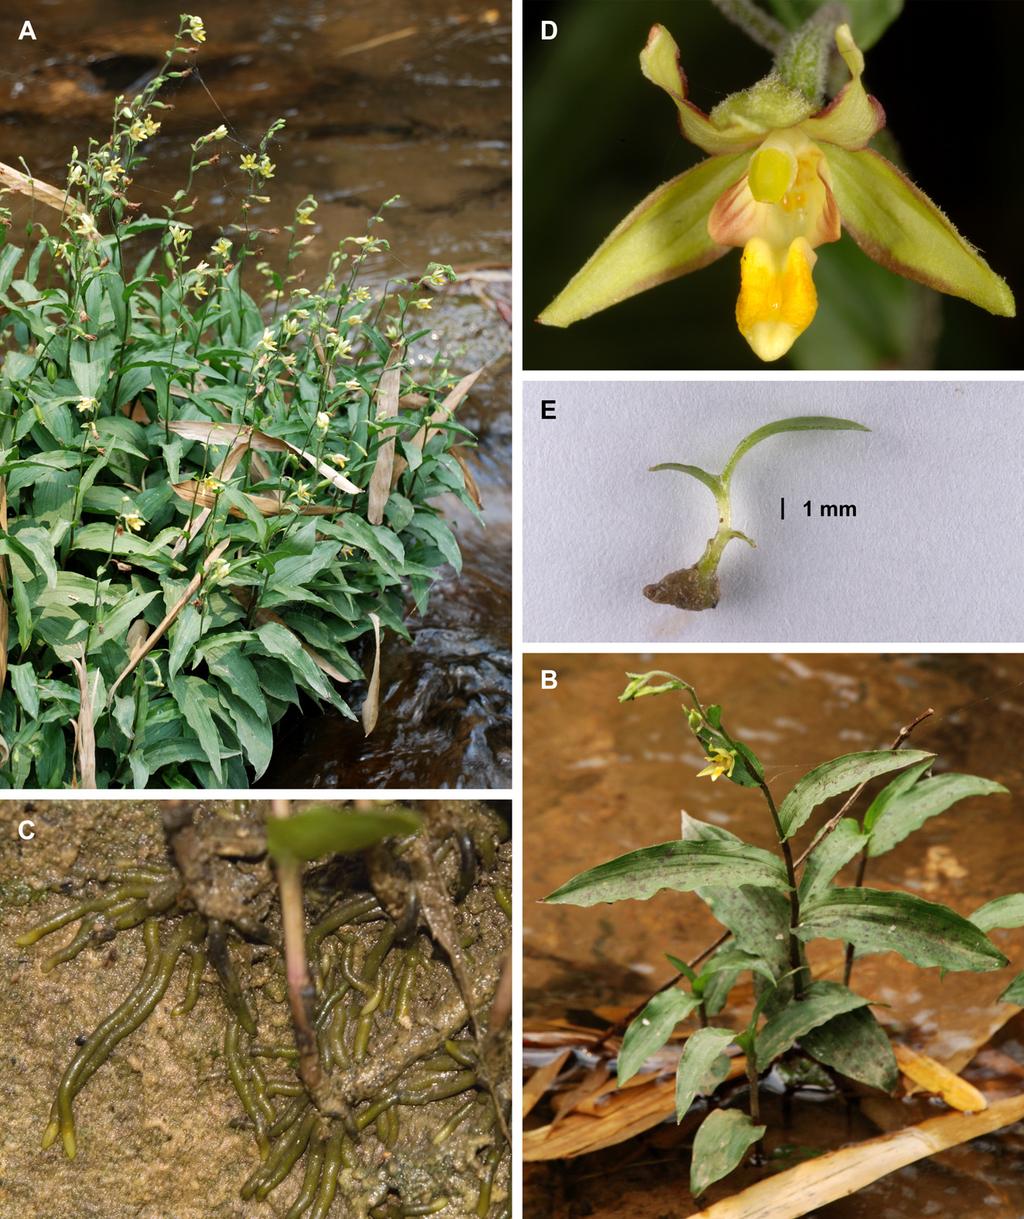 TAXONOMY AND ECOLOGY OF EPIPACTIS FLAVA 361 Figure 1. Morphology of Epipactis flava. A, large flowering clone growing on rock in a stream; B, small clone emerging from sandy substrate below c.